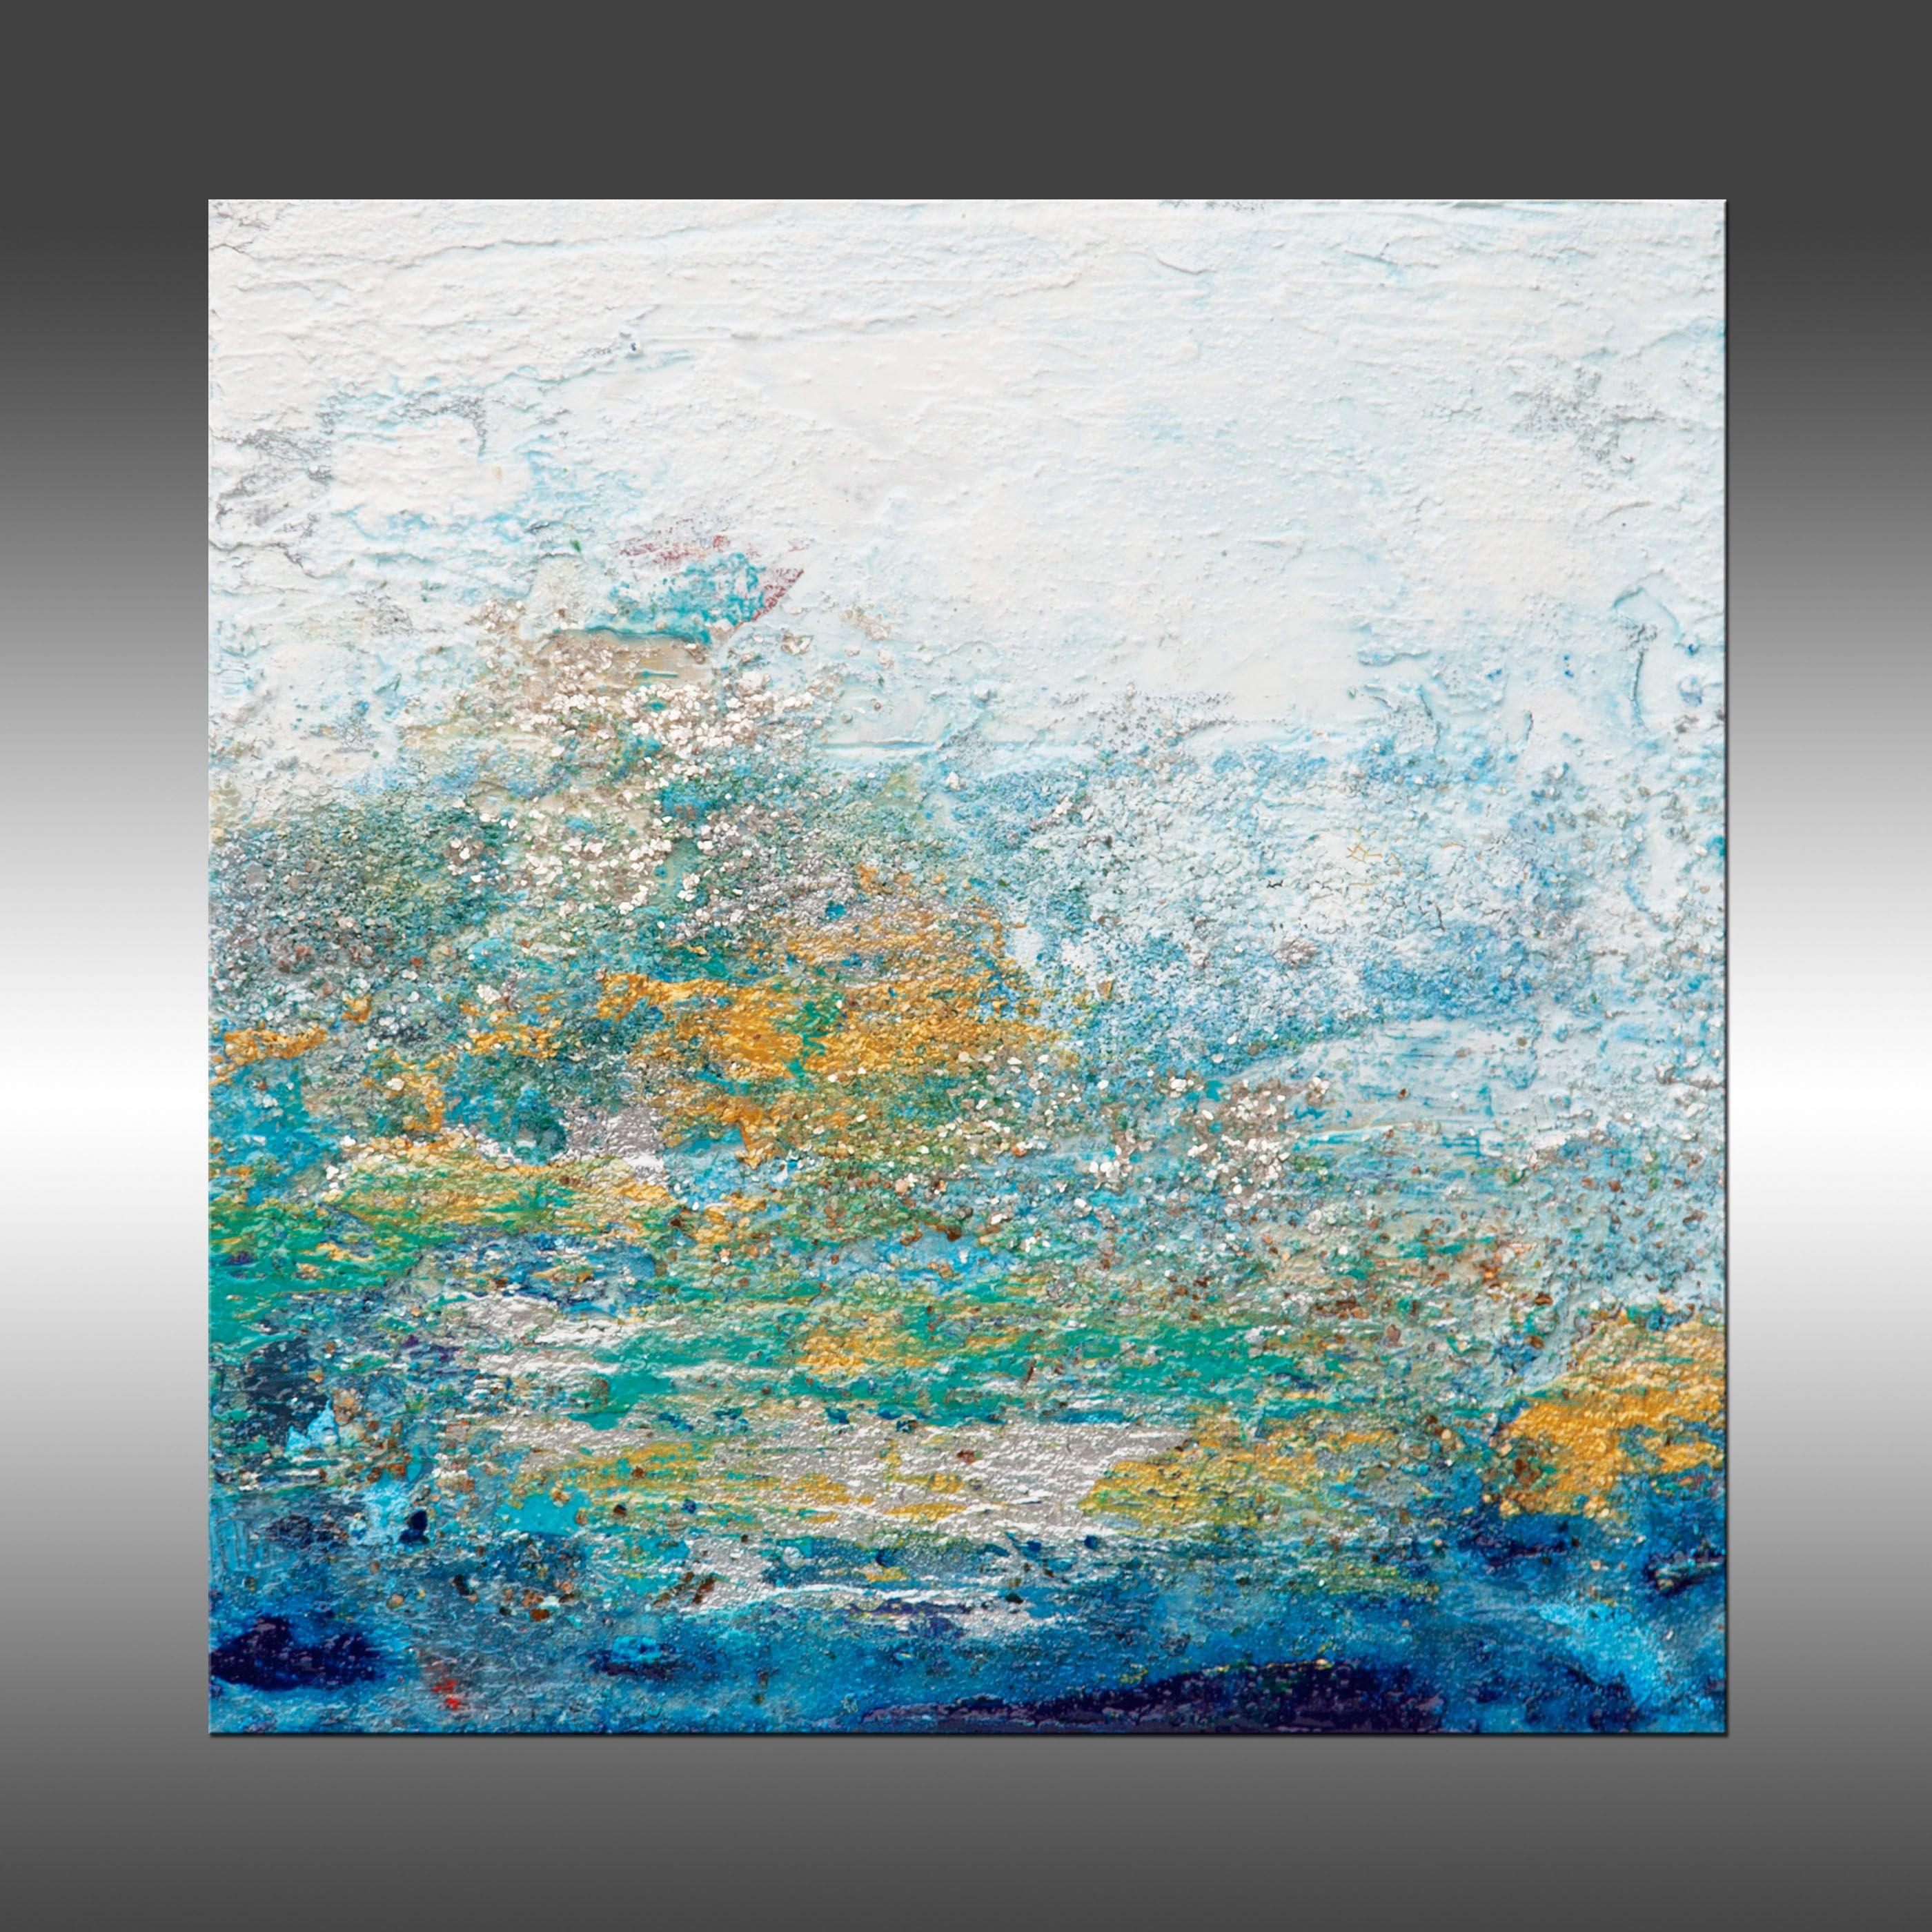 Views of Nature 73 is an original painting, created with acrylic paint on gallery-wrapped canvas. It has a width of 8 inches and a height of 8 inches with a depth of 1.5 inches (8x8x1.5).    The colors used in the painting are white, blue, gray,